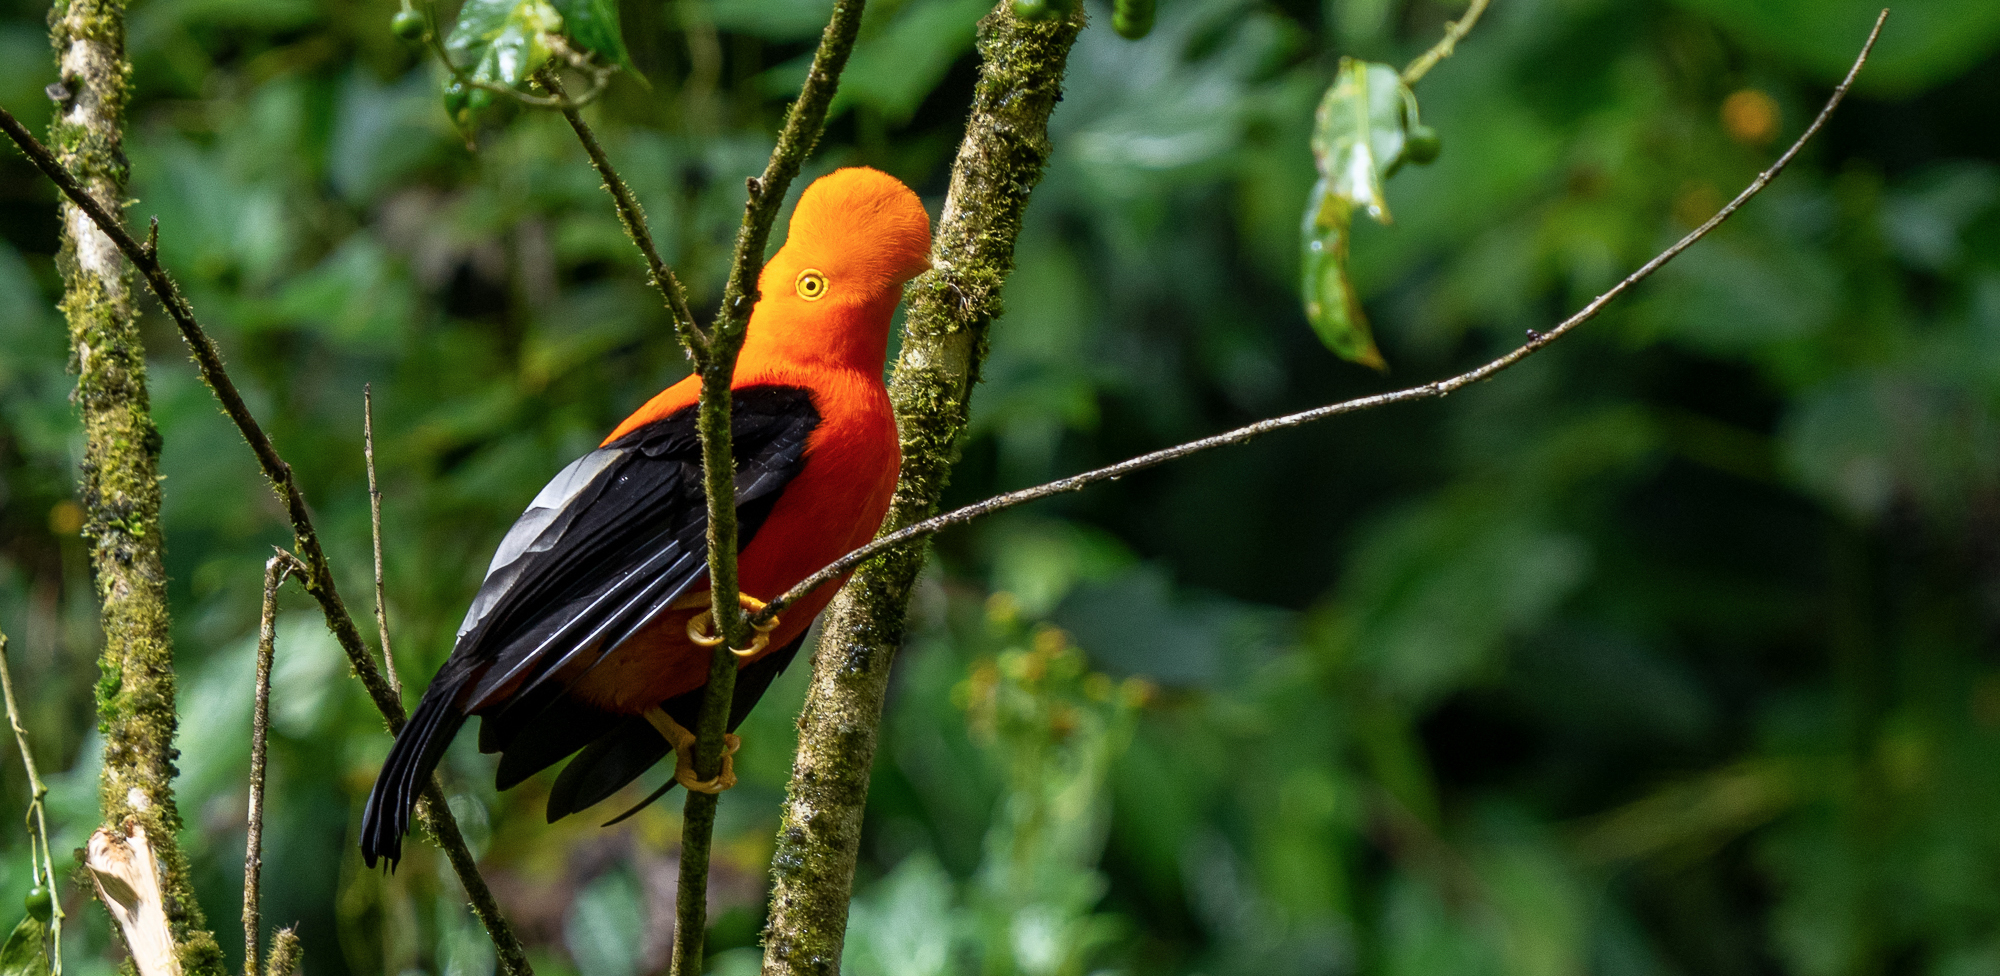 Photograph of an endemic tropical bird called the Andean Cock of the Rock perched on branch in the cloud forest in San Francisco de Borja, Napo Province, Ecuador